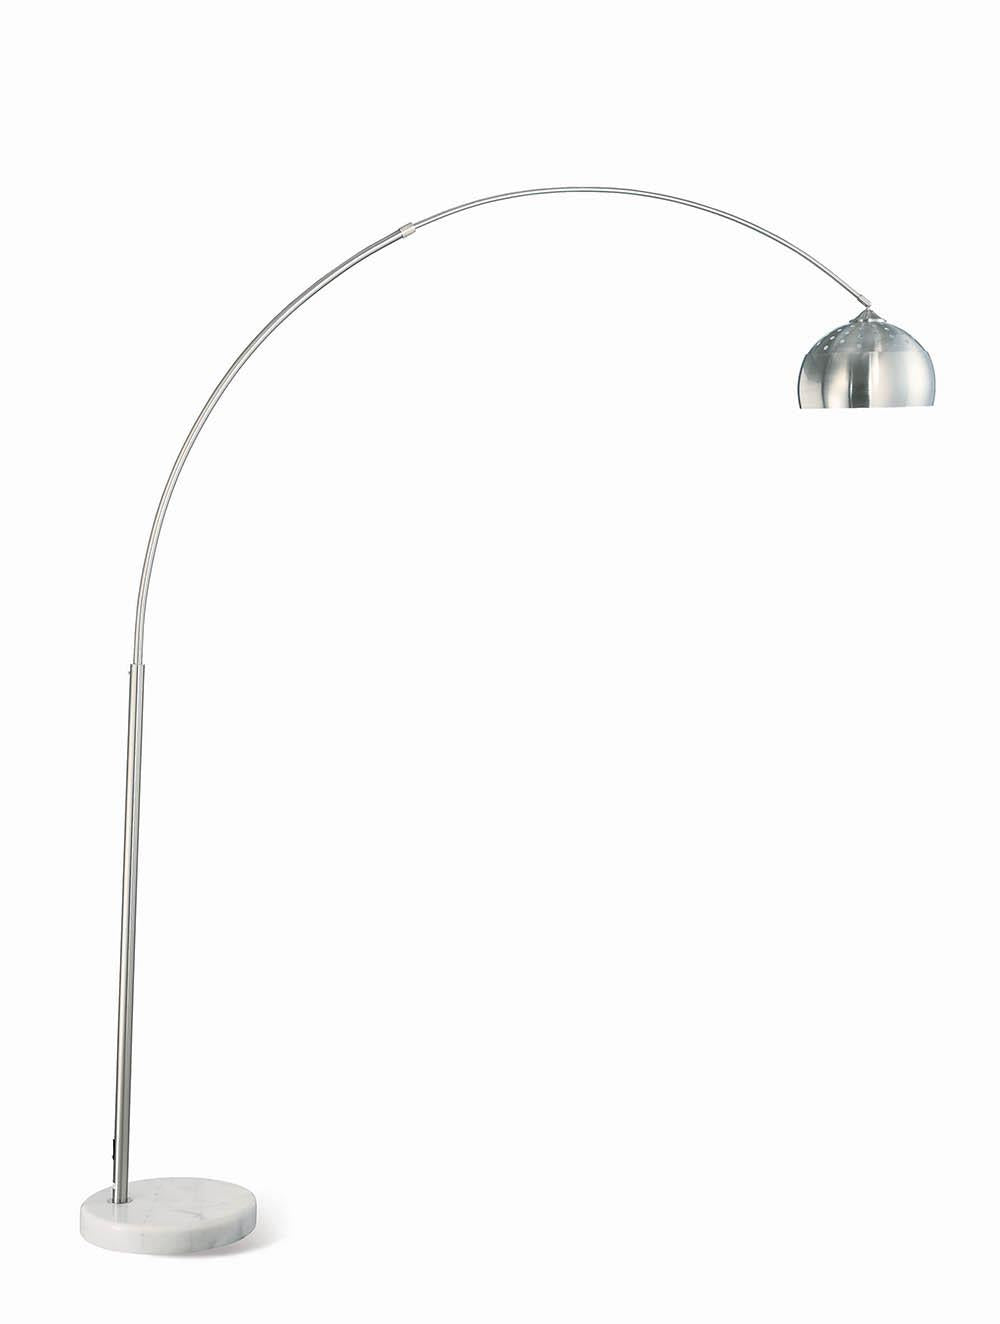 G901199 - Arched Floor Lamp - Brushed Steel And Chrome - ReeceFurniture.com